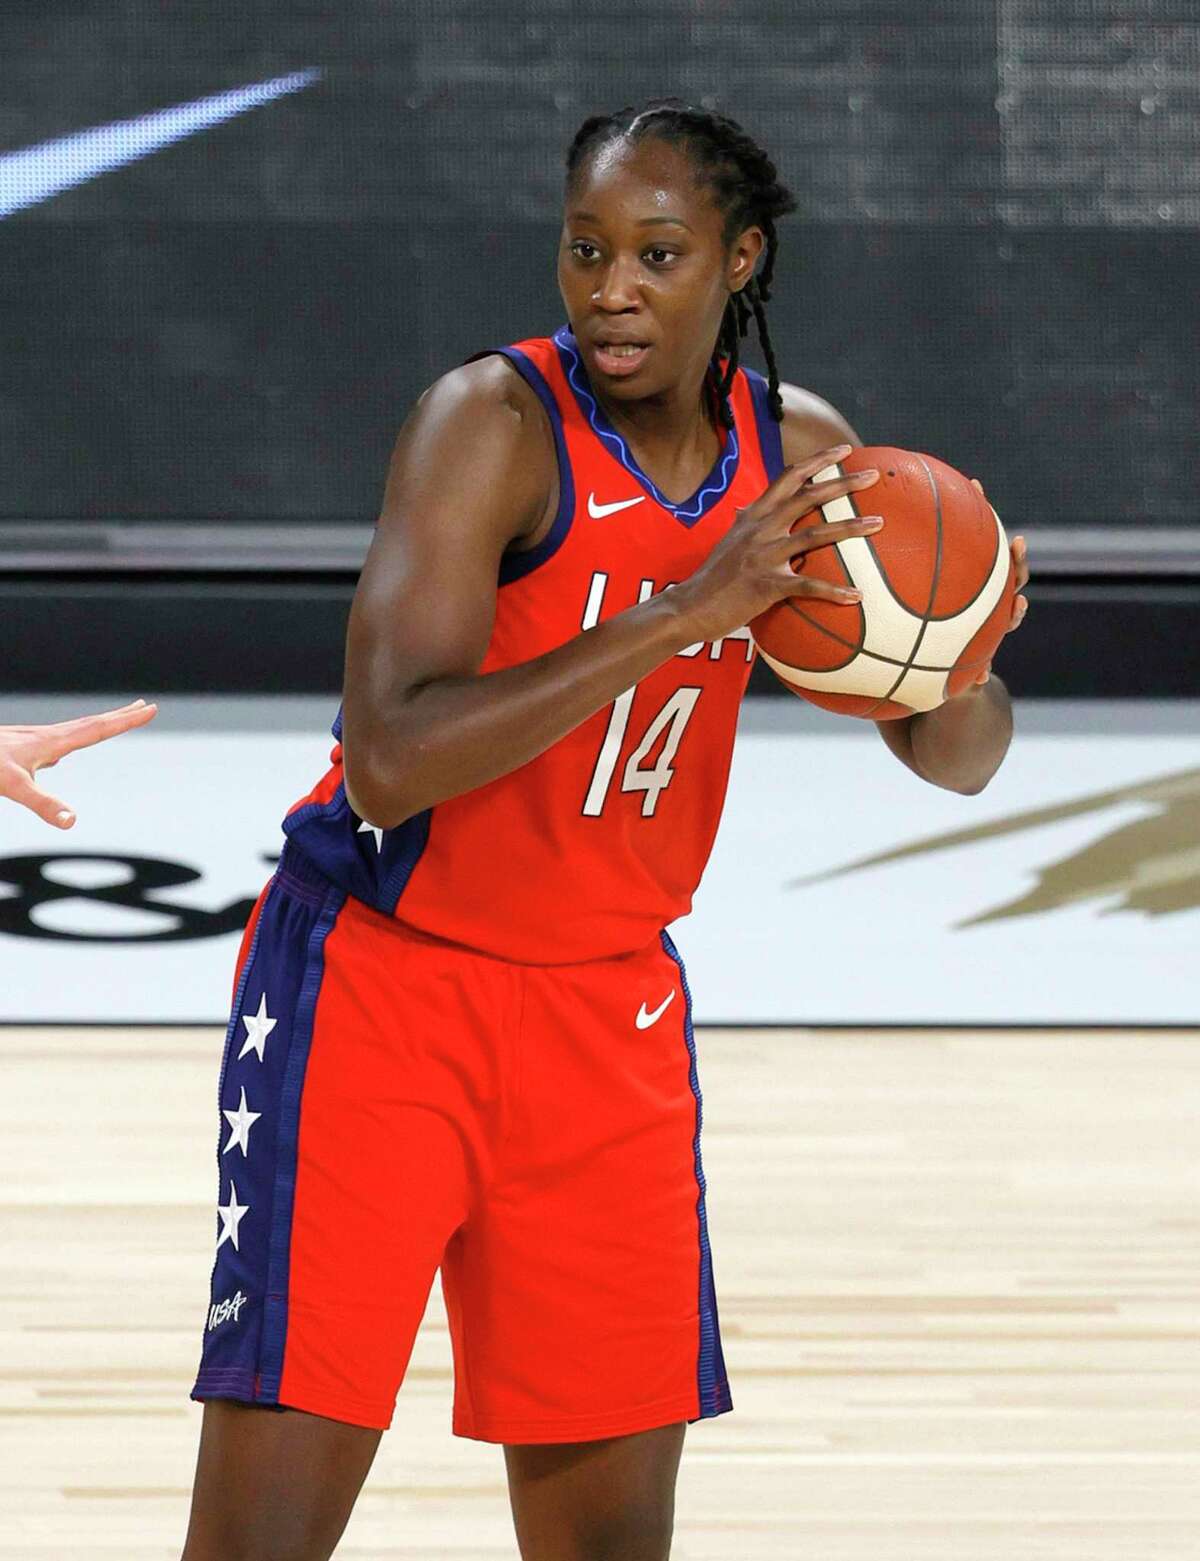 Tina Charles: An eight-time WNBA All-Star and two-time NCAA Champion, Charles owns three World Cup Gold medals while playing for Team USA.